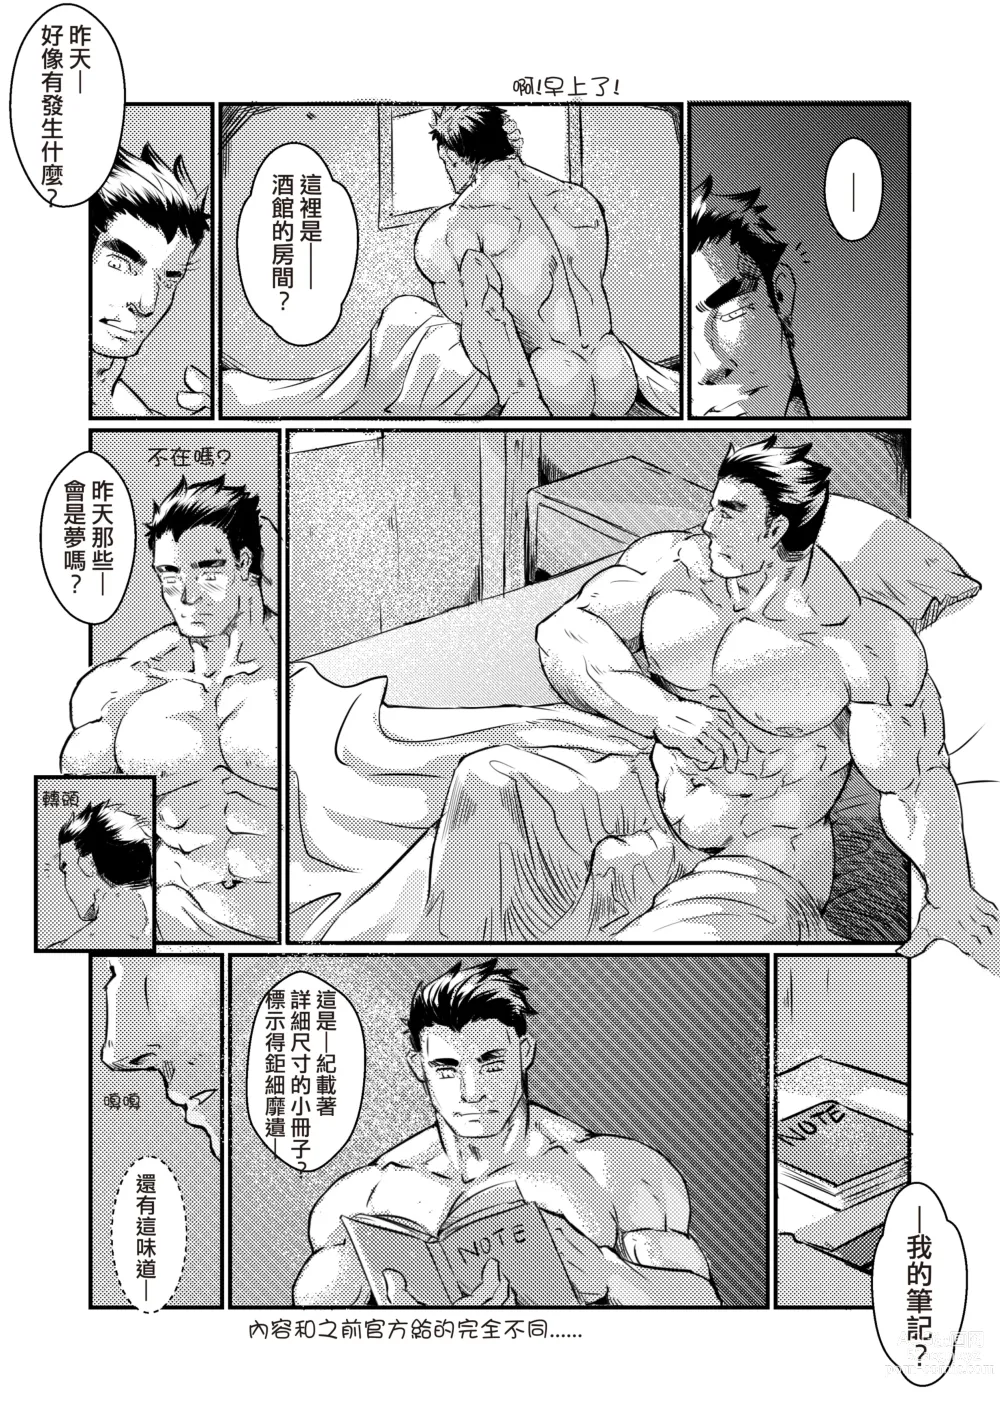 Page 27 of doujinshi Fairy Tale of Afterschool ACT.1 國王的新衣 (decensored)